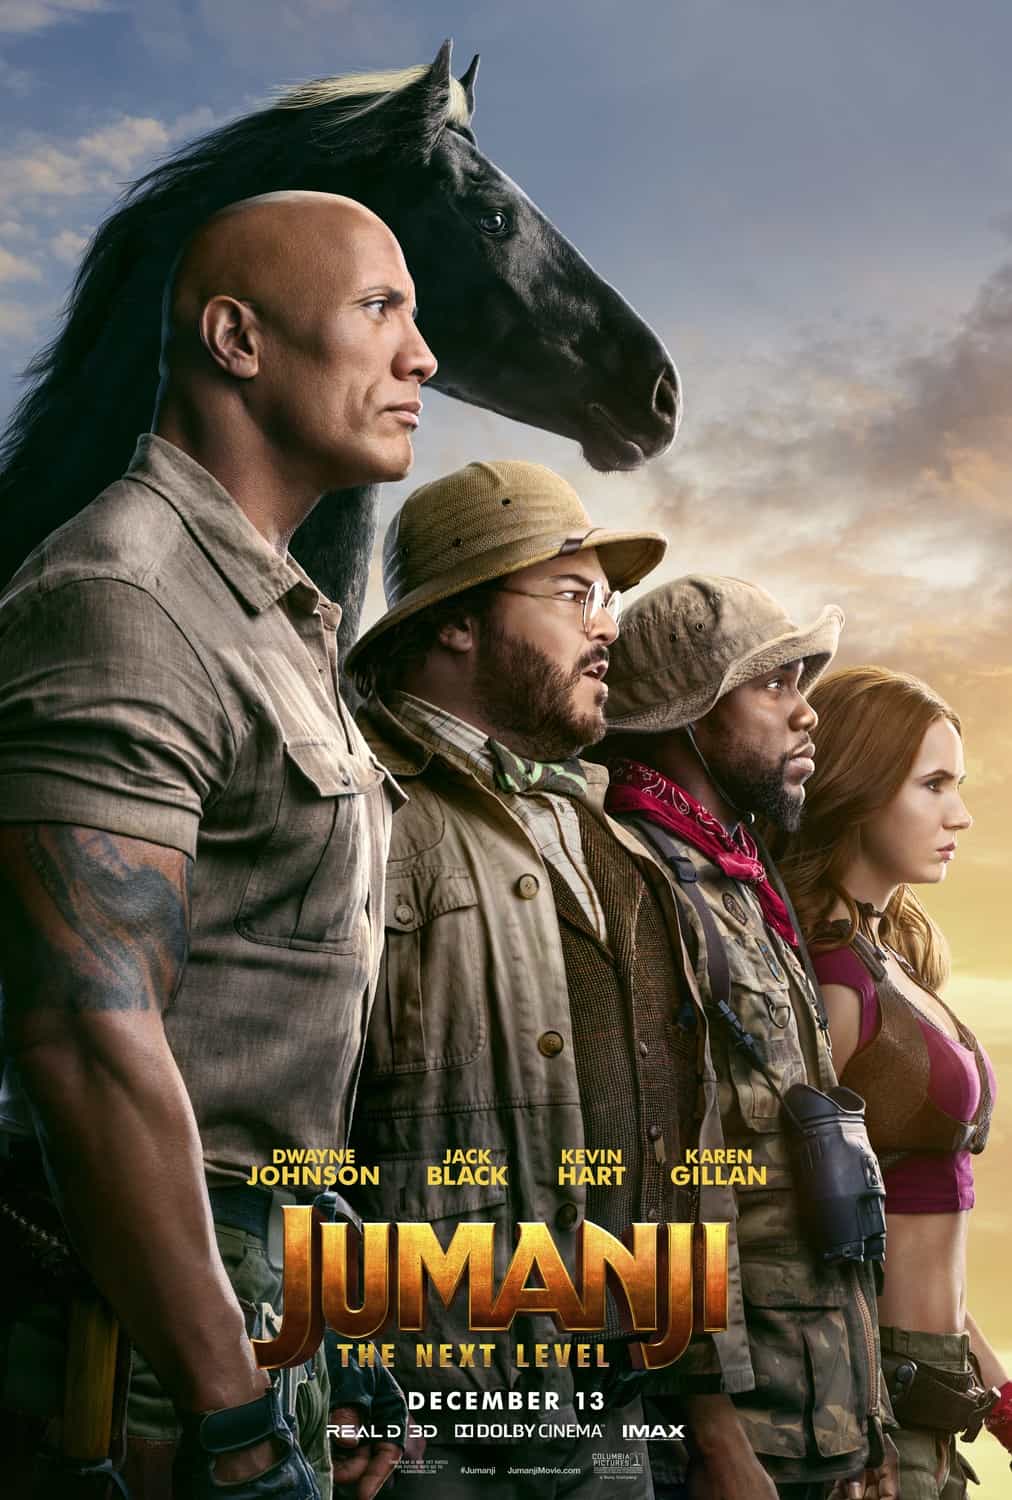 Last trailer for Jumanji: The Next Level before the movie gets released on December 13th